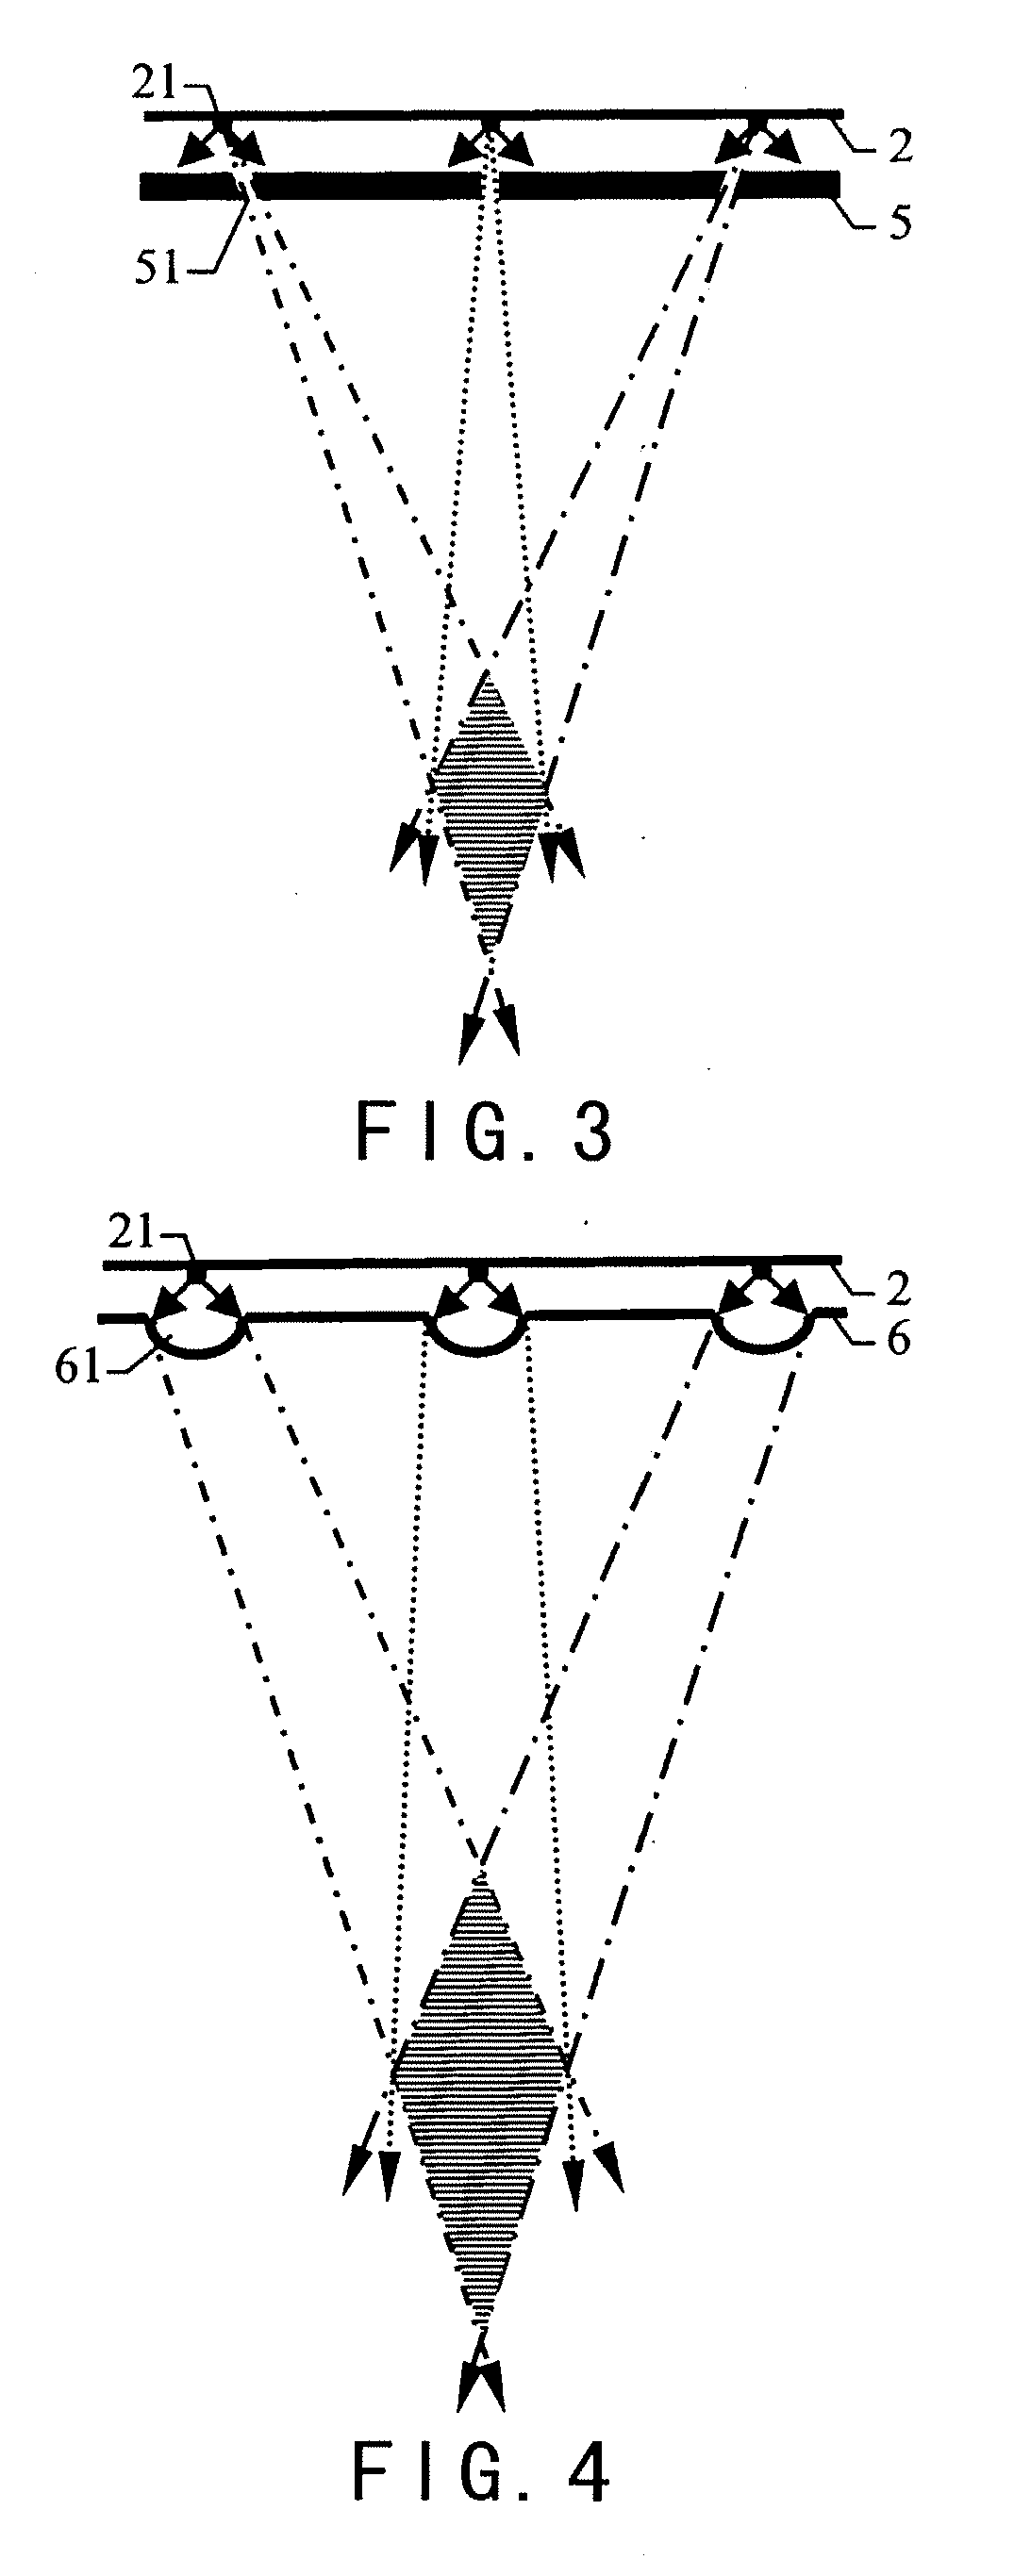 Screen Device for Three-Dimensional Display with Full Viewing-Field